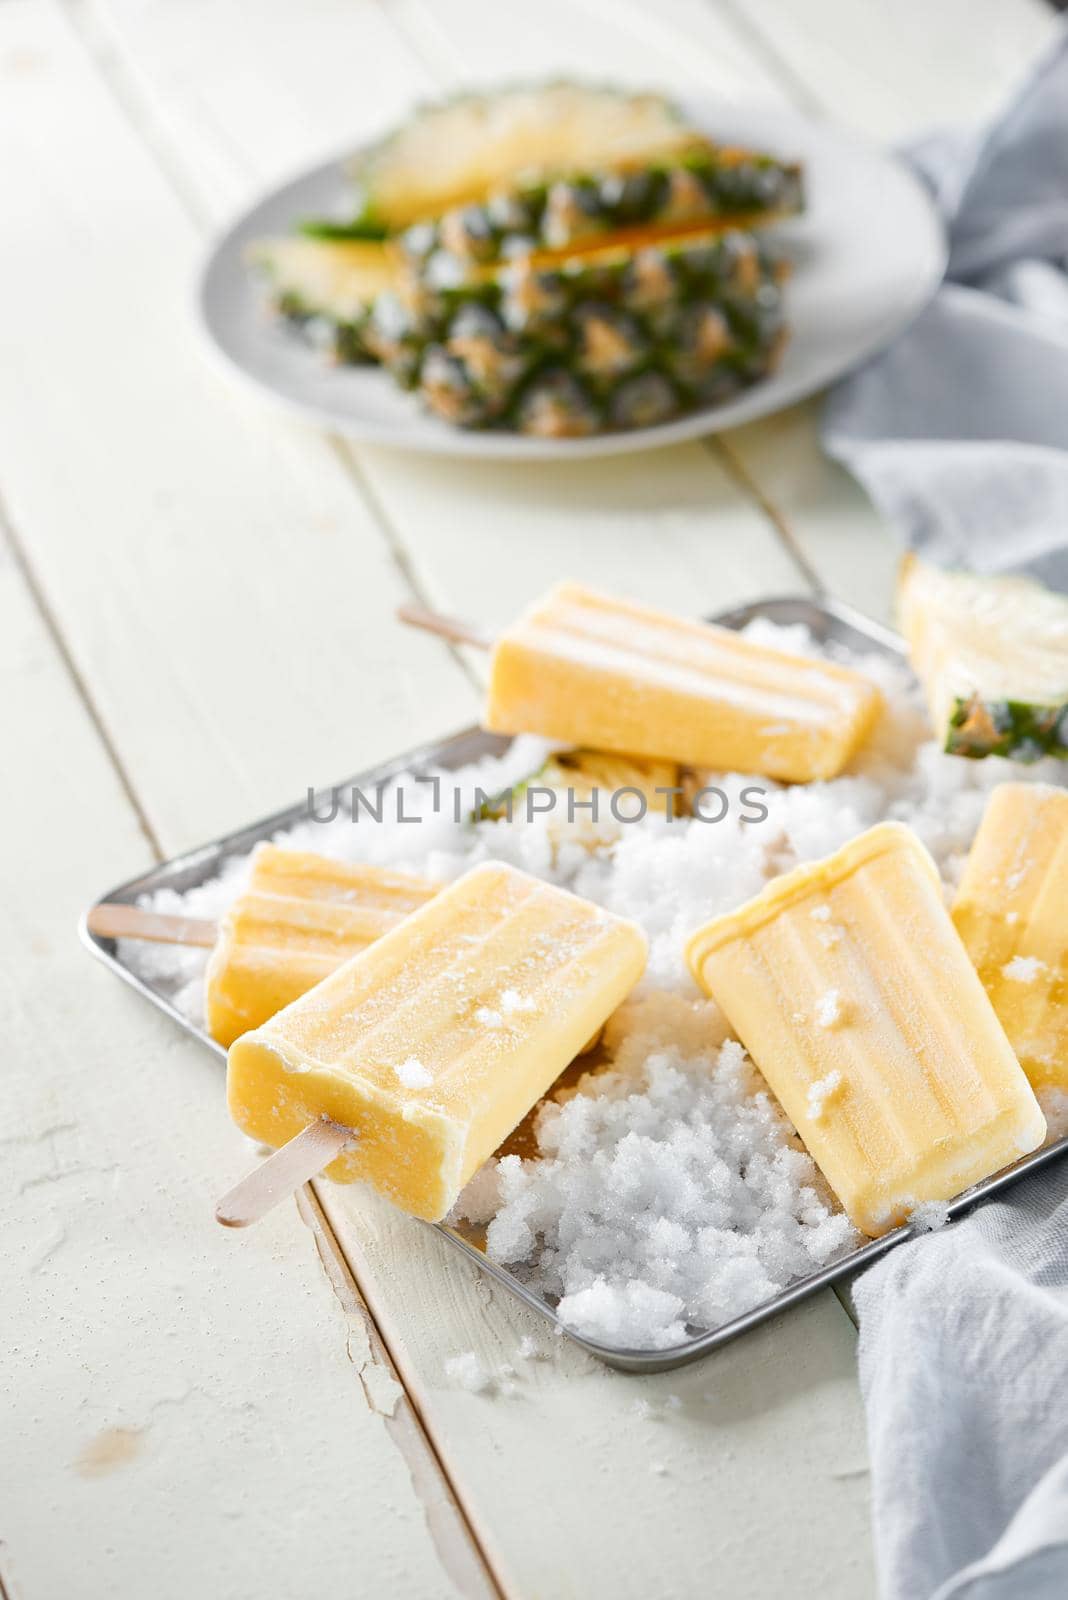 Yellow fruit popsicles on a plate. Top view over a white wood background. by makidotvn